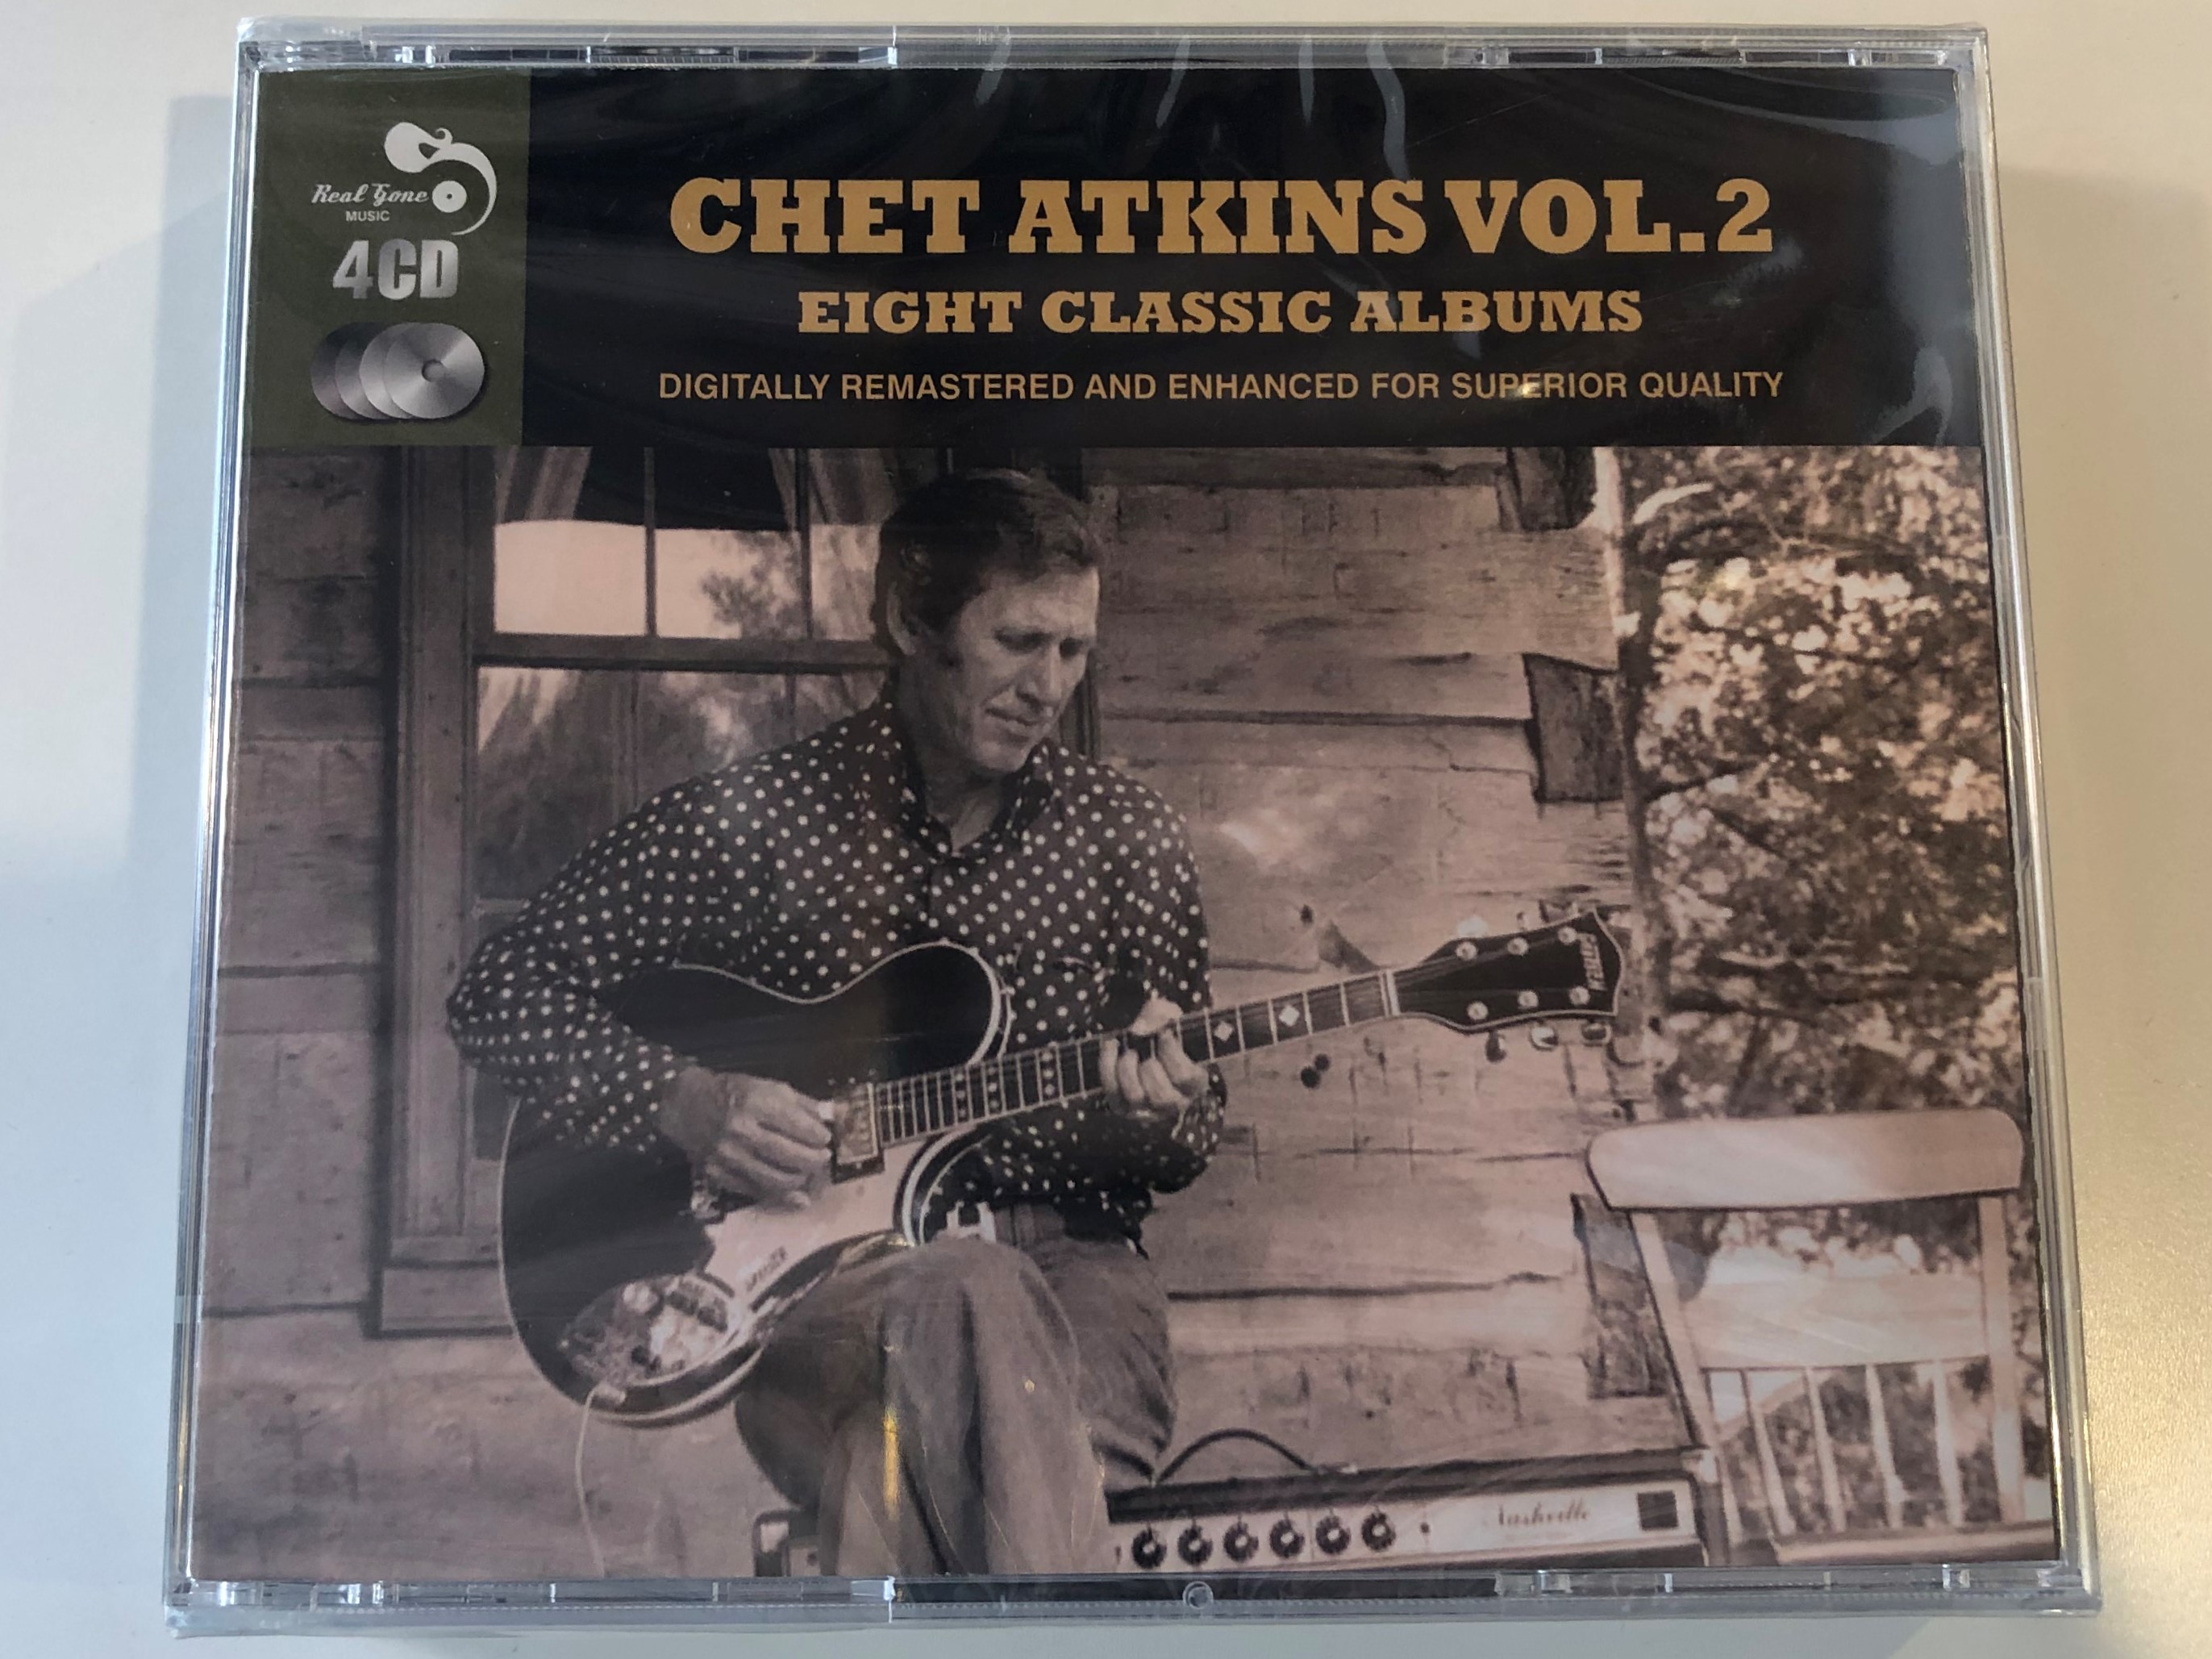 chet-atkins-vol.-2-eight-classic-albums-digitally-remastered-and-enhanced-for-superior-quality-real-gone-4x-audio-cd-rgmcd032-1-.jpg